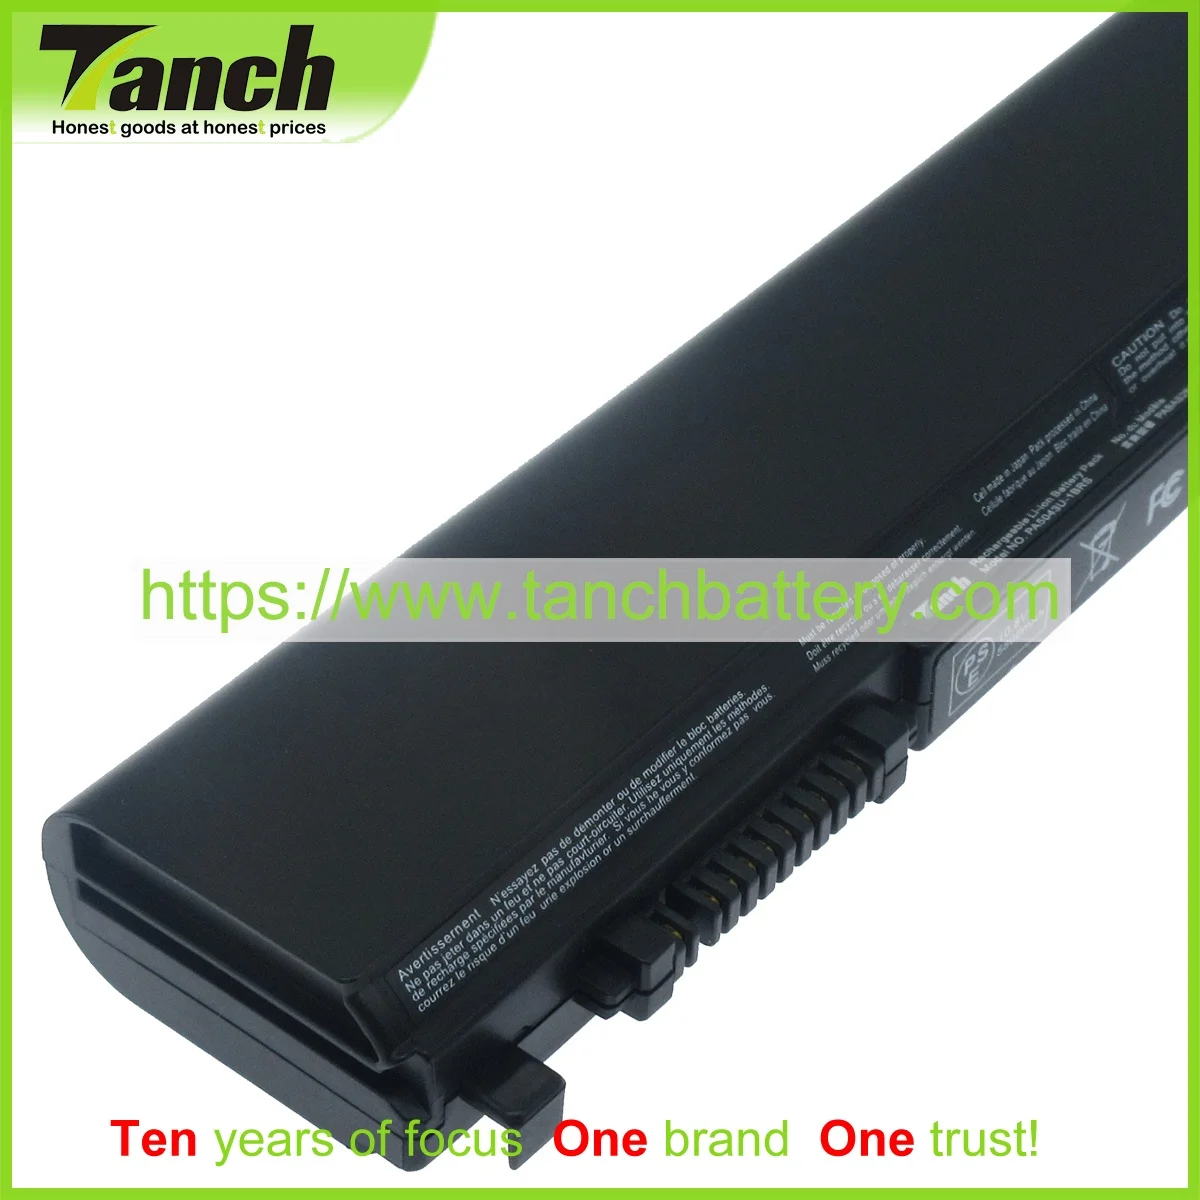 Tanch Laptop Battery for TOSHIBA PABAS265 PABAS249 PA3832U-1BRS PA3929U-1BRS PABAS236 PA3931U-1BRS PA5043U-1BRS 10.8V 6cell images - 6